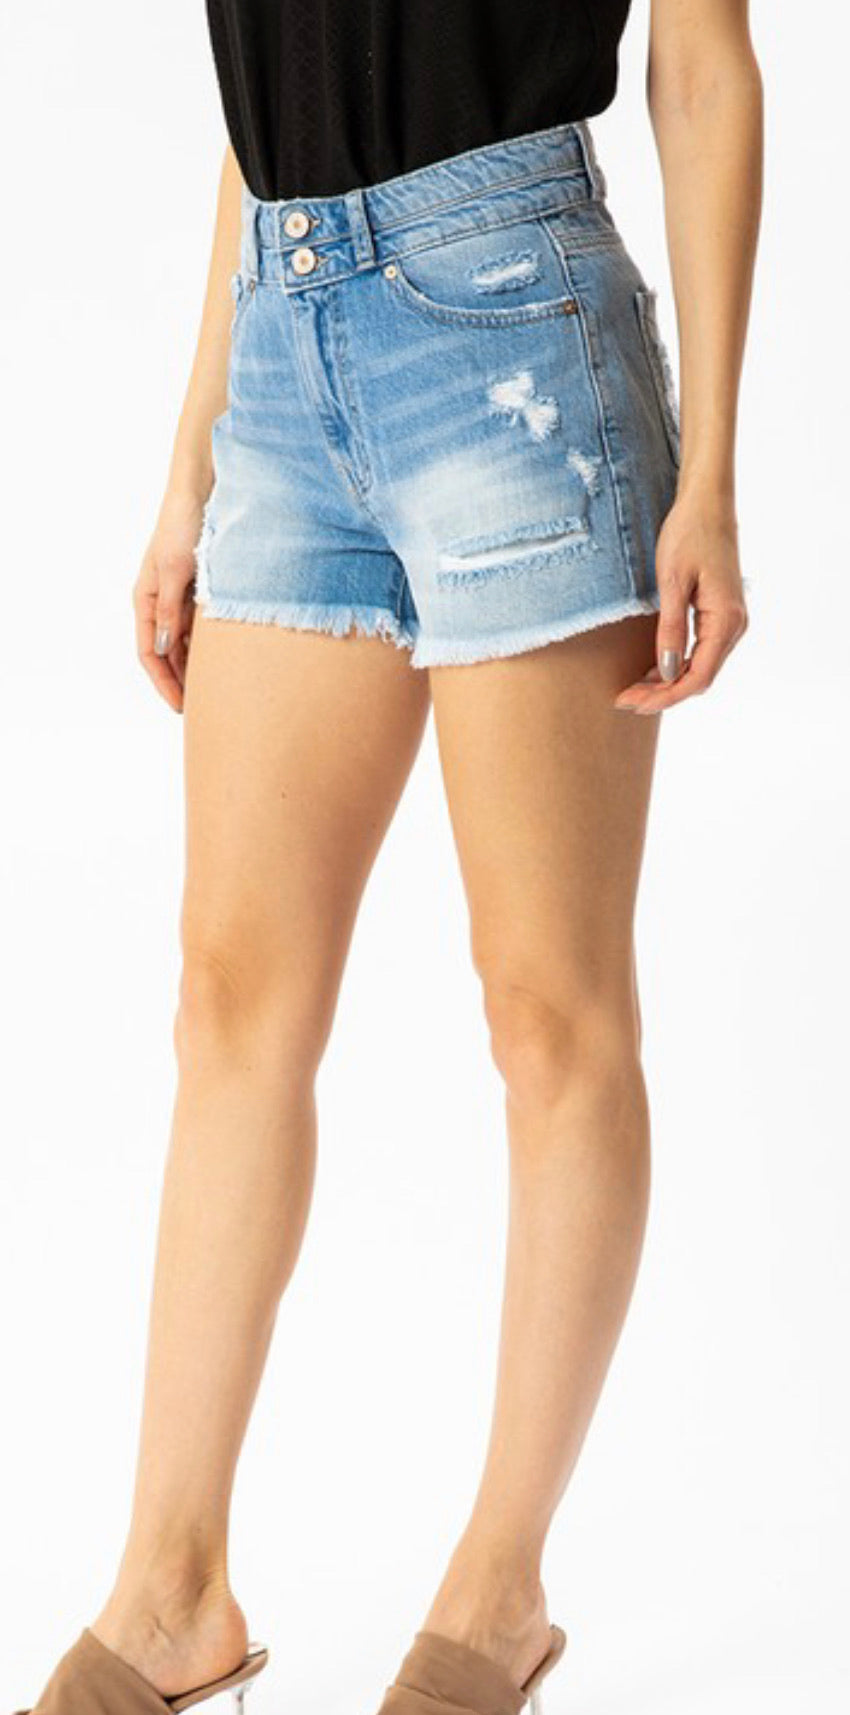 Double button Shorts (Curvy and Regular!)